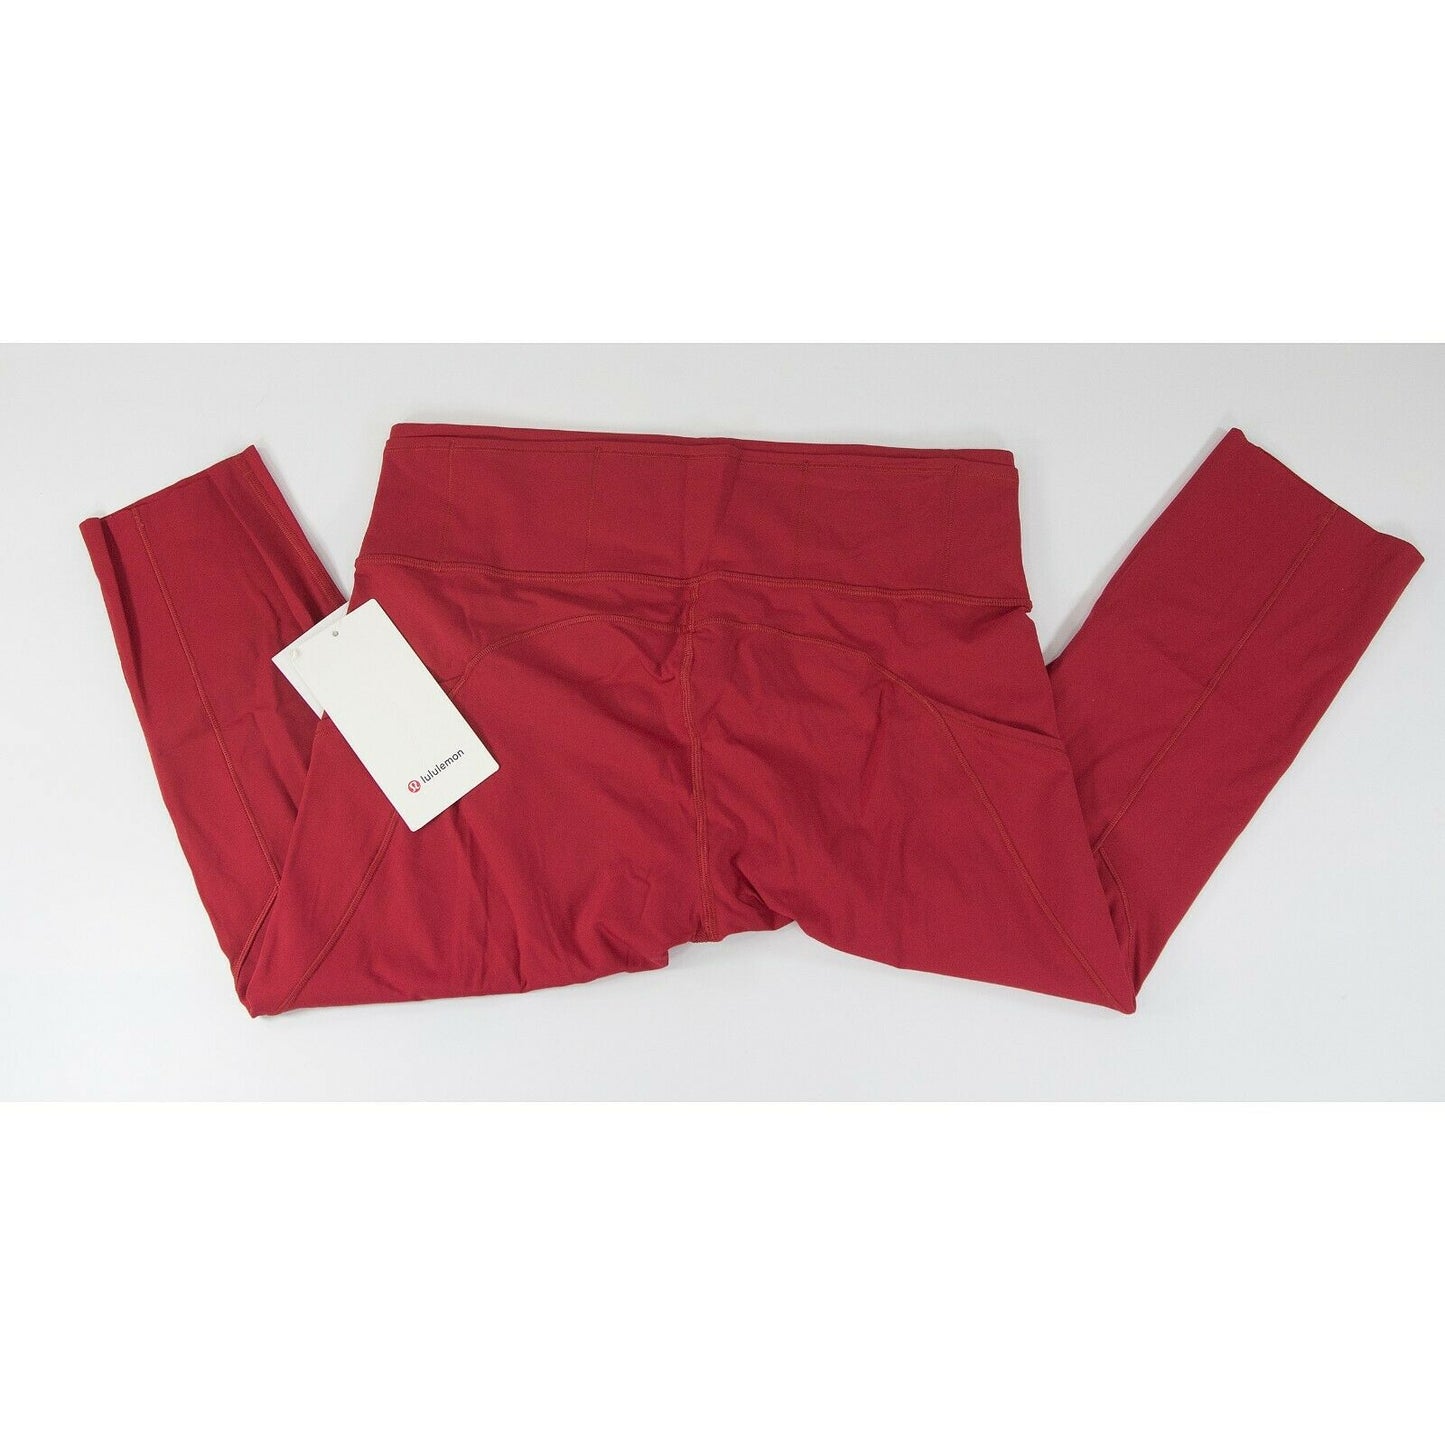 Lululemon Red Fast Free Cropped Pocket tight leggings NWT Size 12 C27